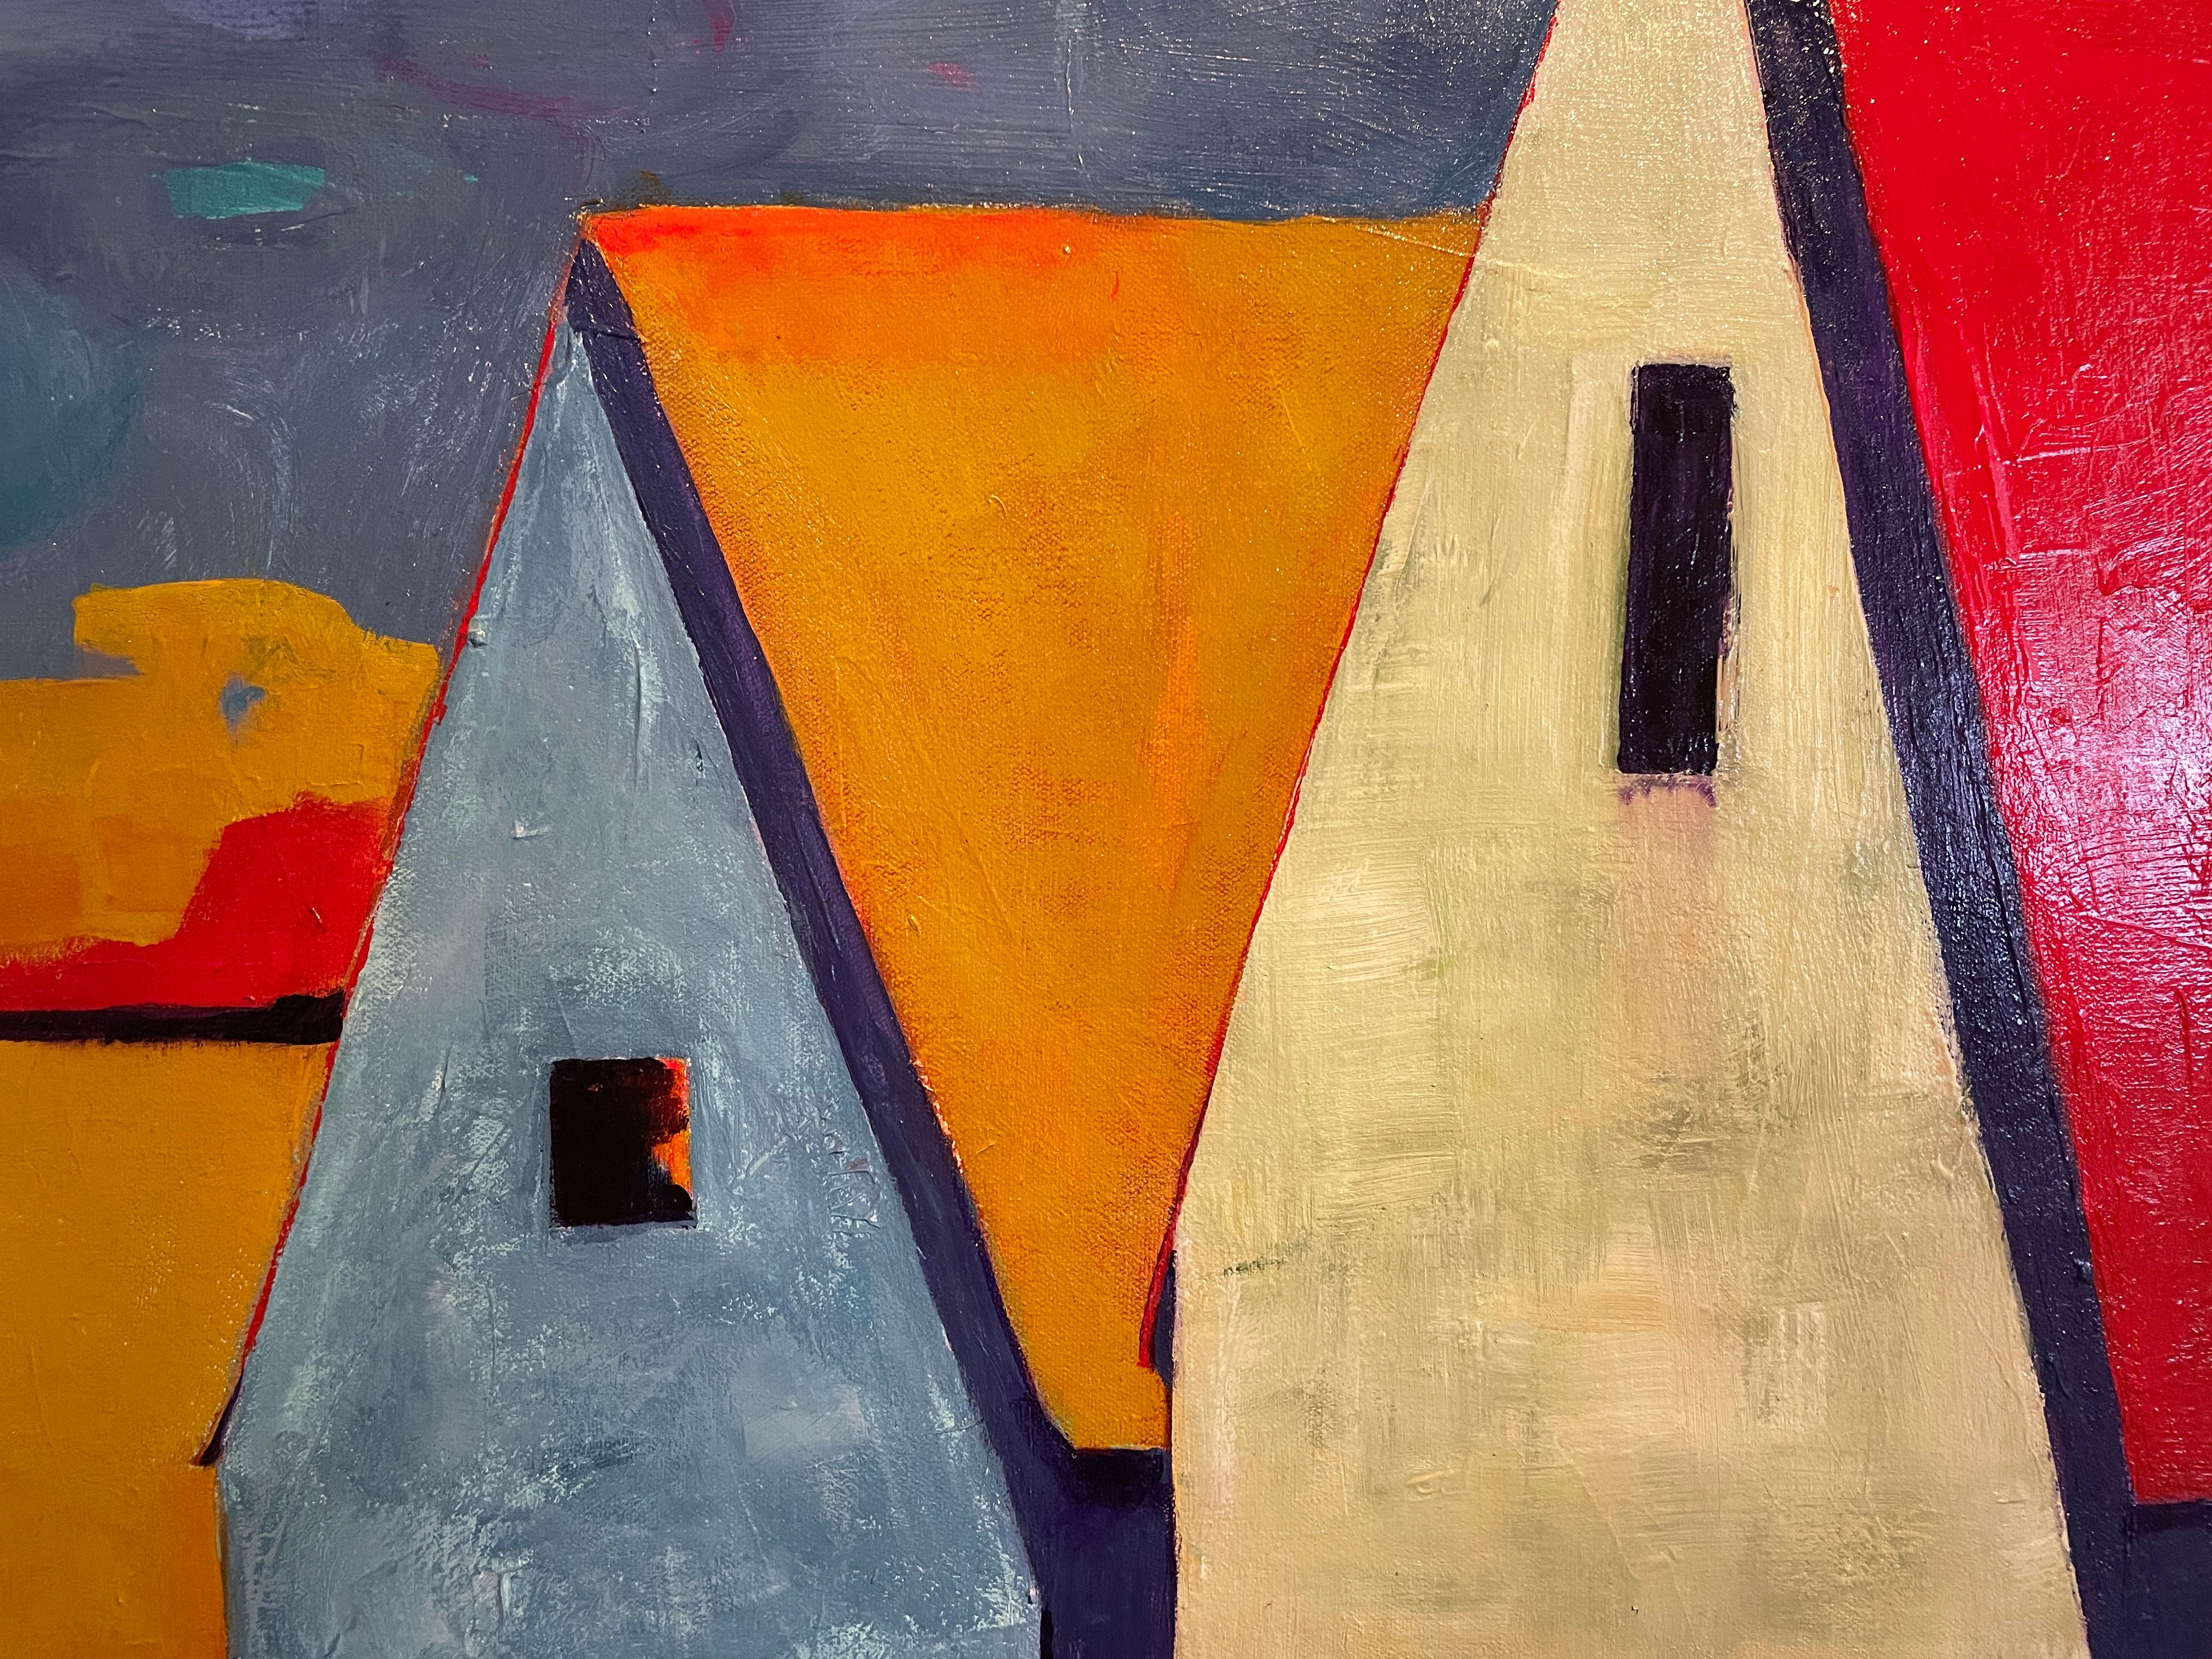 'Twilight Vista' Landscape of Serene Huts amidst an Abstract Sky by Maria Poroy For Sale 3